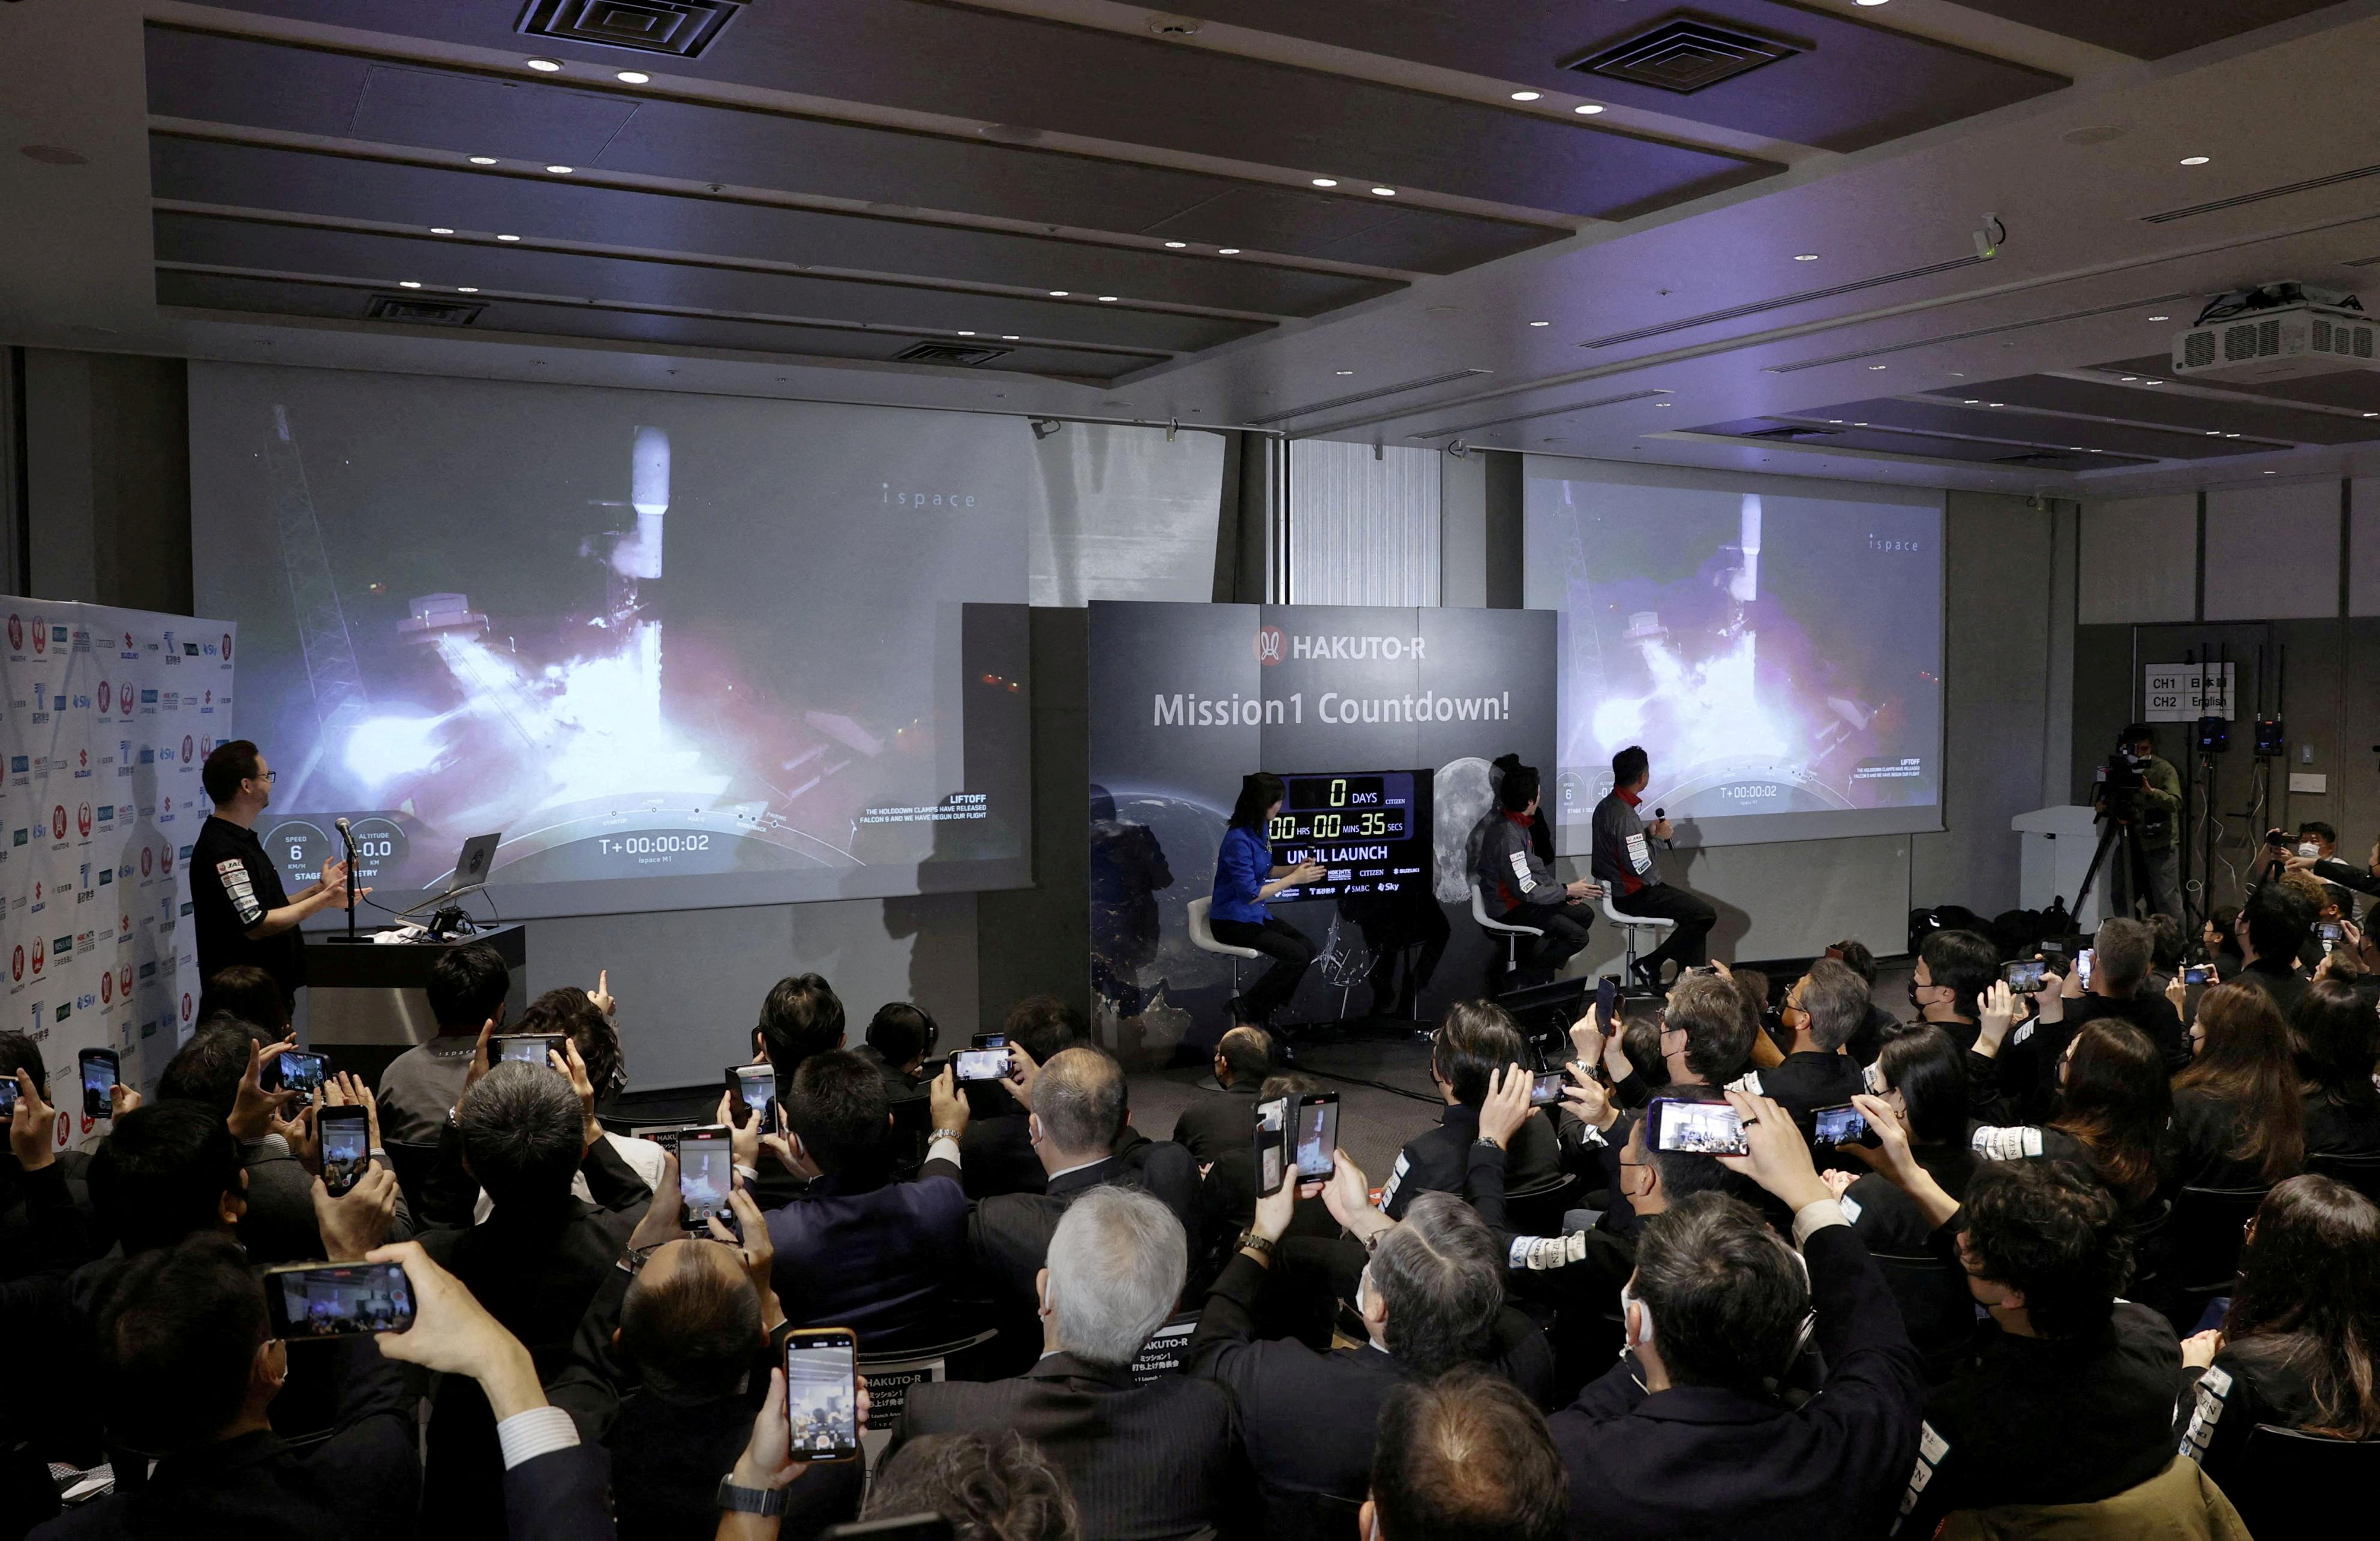 Officials of ispace Inc's HAKUTO-R mission look at live broadcasting of the launch of a SpaceX Falcon 9 rocket in Tokyo